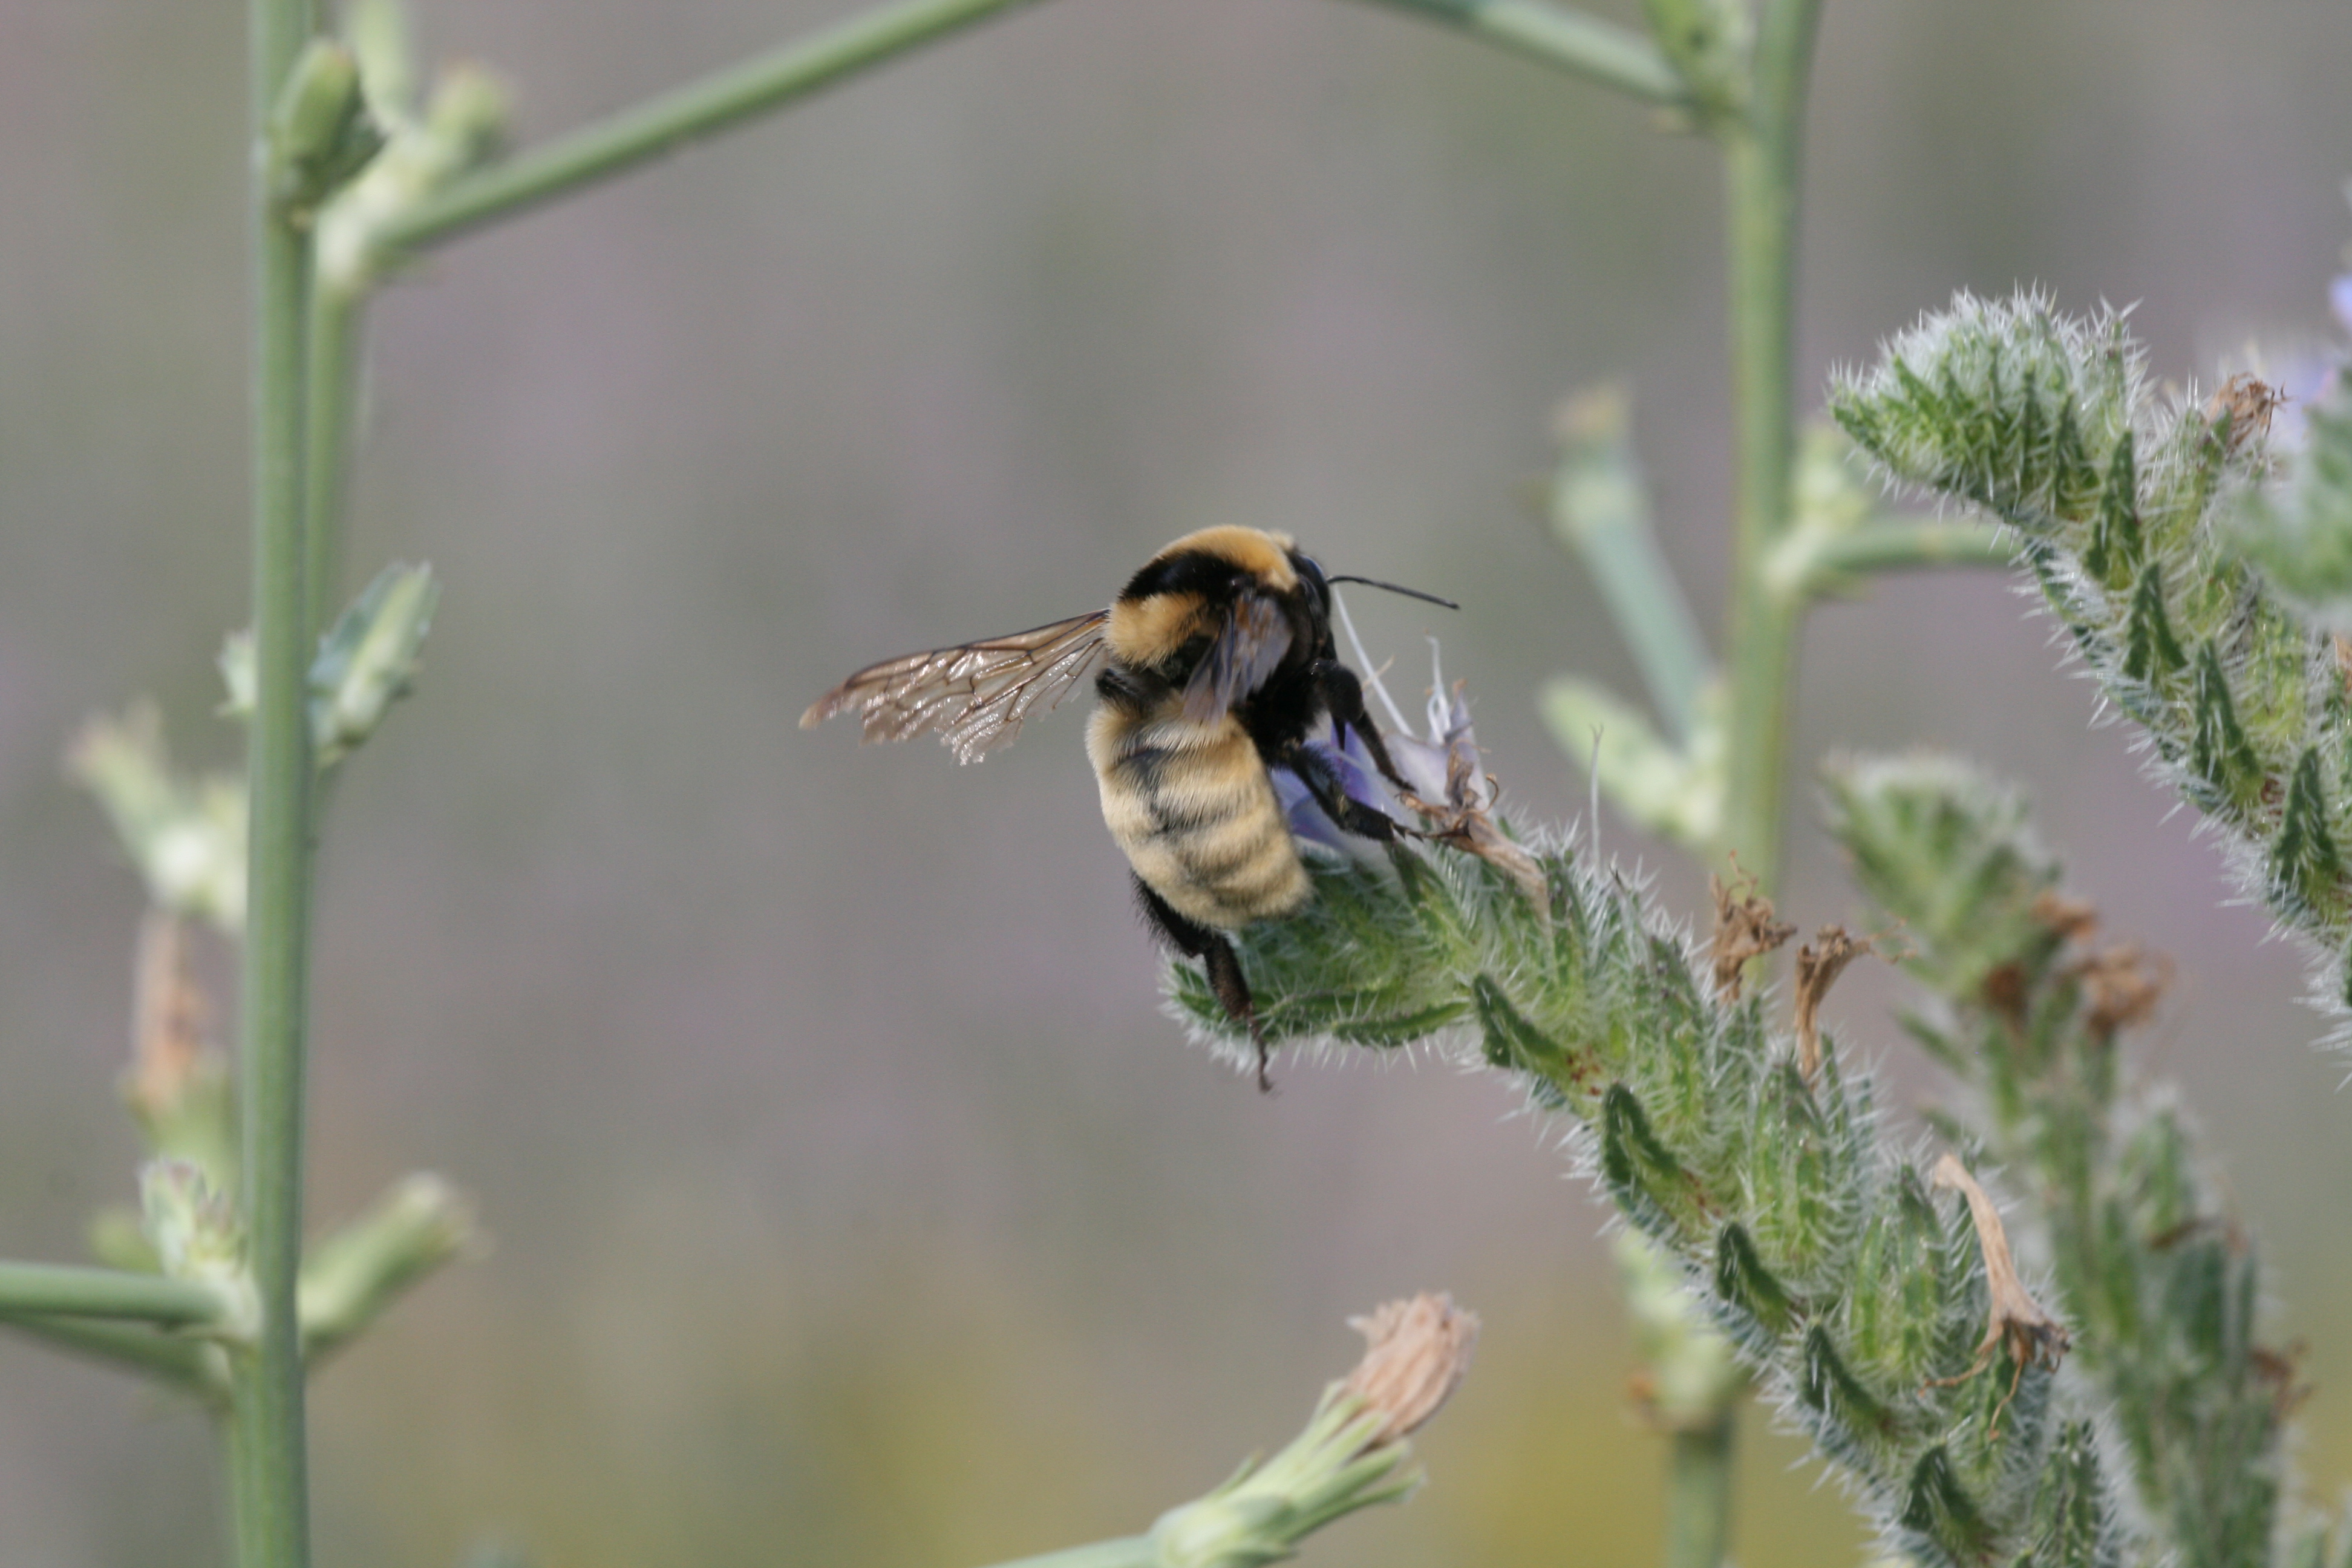 Europe’s largest bumblebee, the Endangered Bombus fragrans, is seriously threatened by the intensification of agriculture